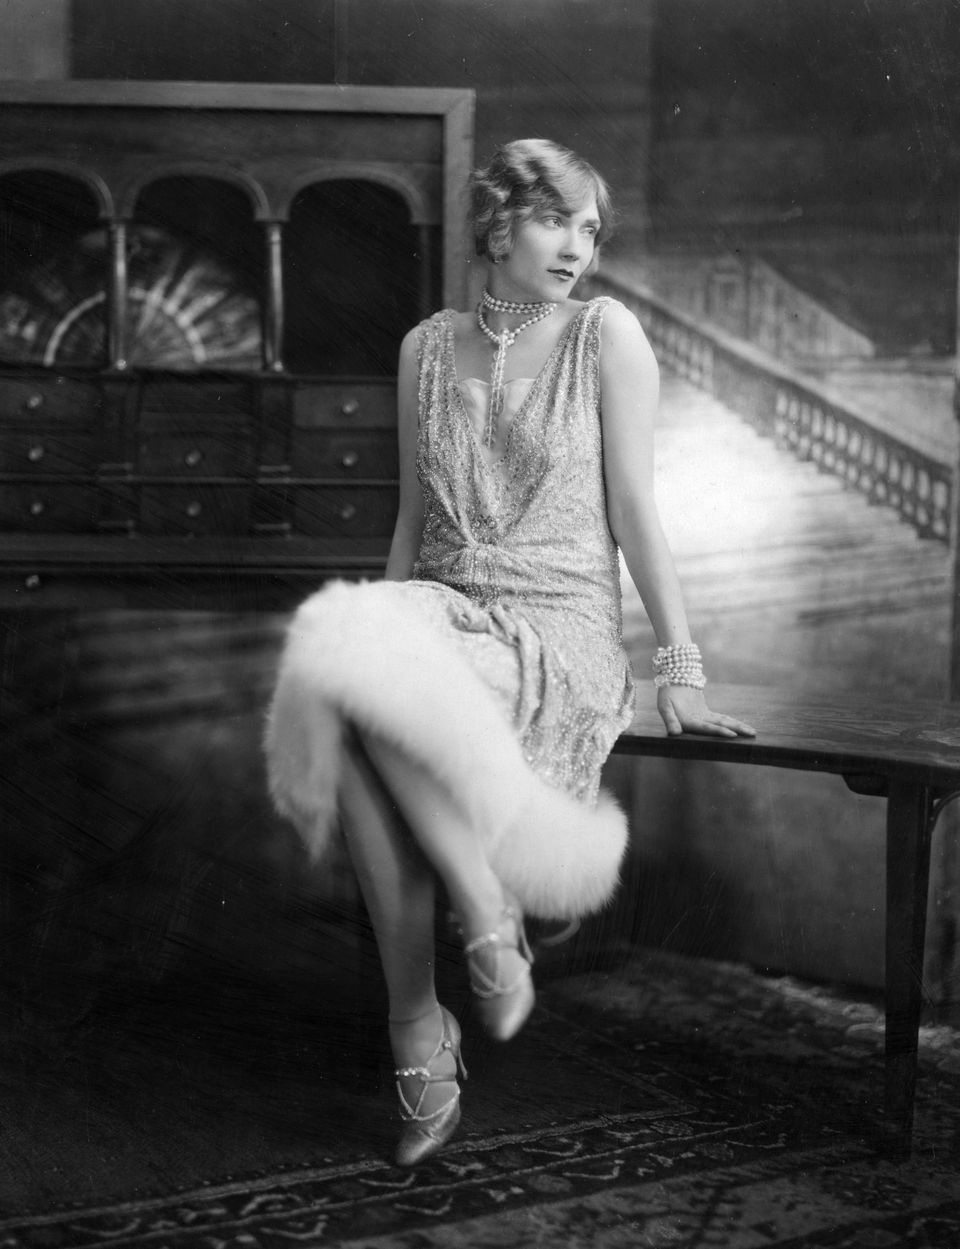 1920s Fashion: How To Add A Little Flapper Style To Your Wardrobe